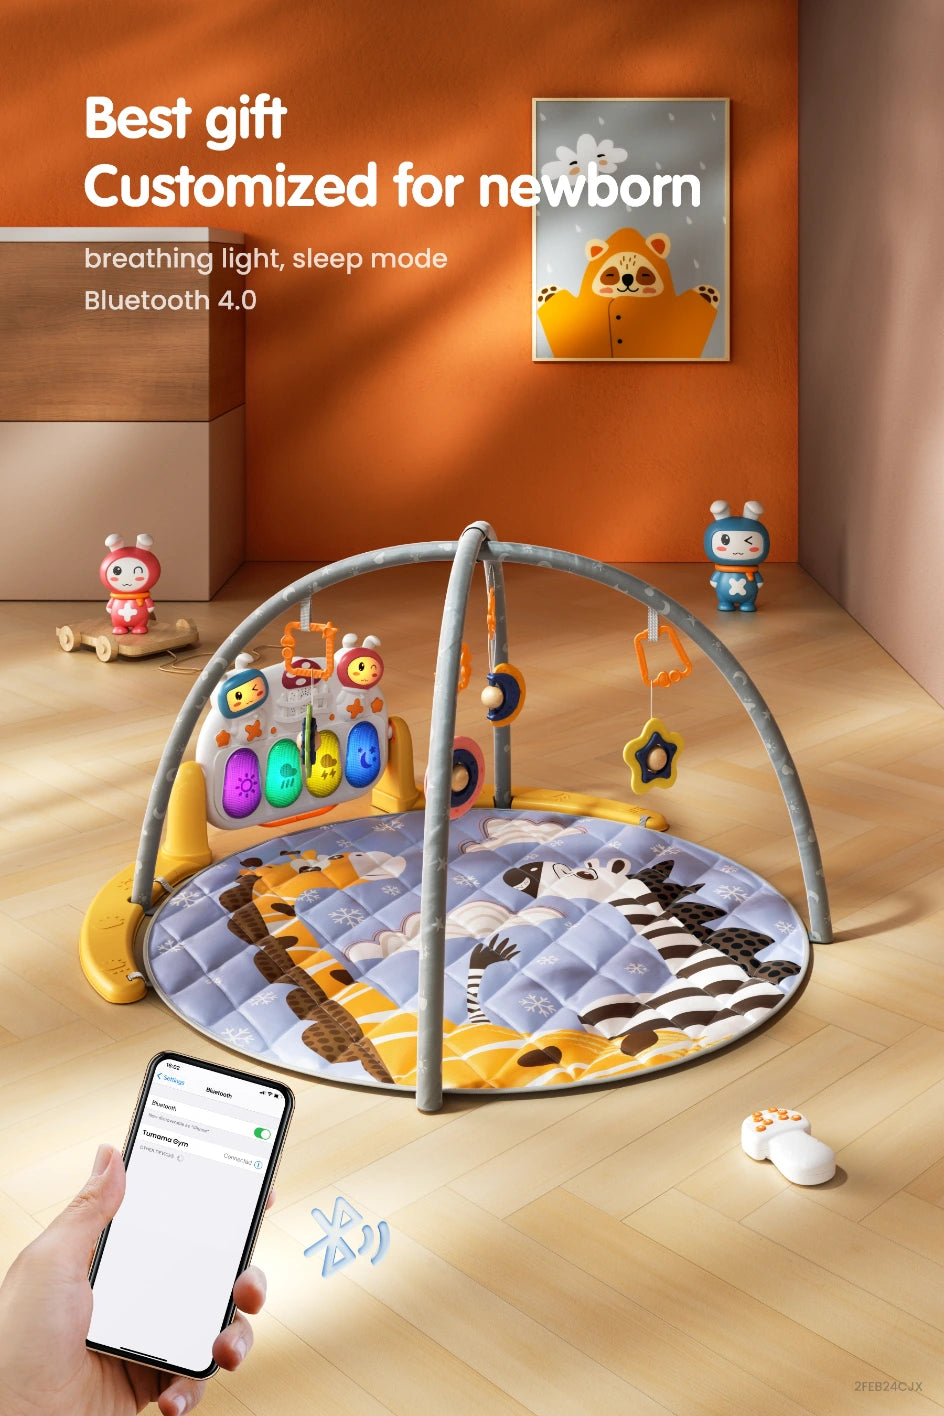 Bluetooth activity mat with hanging toys